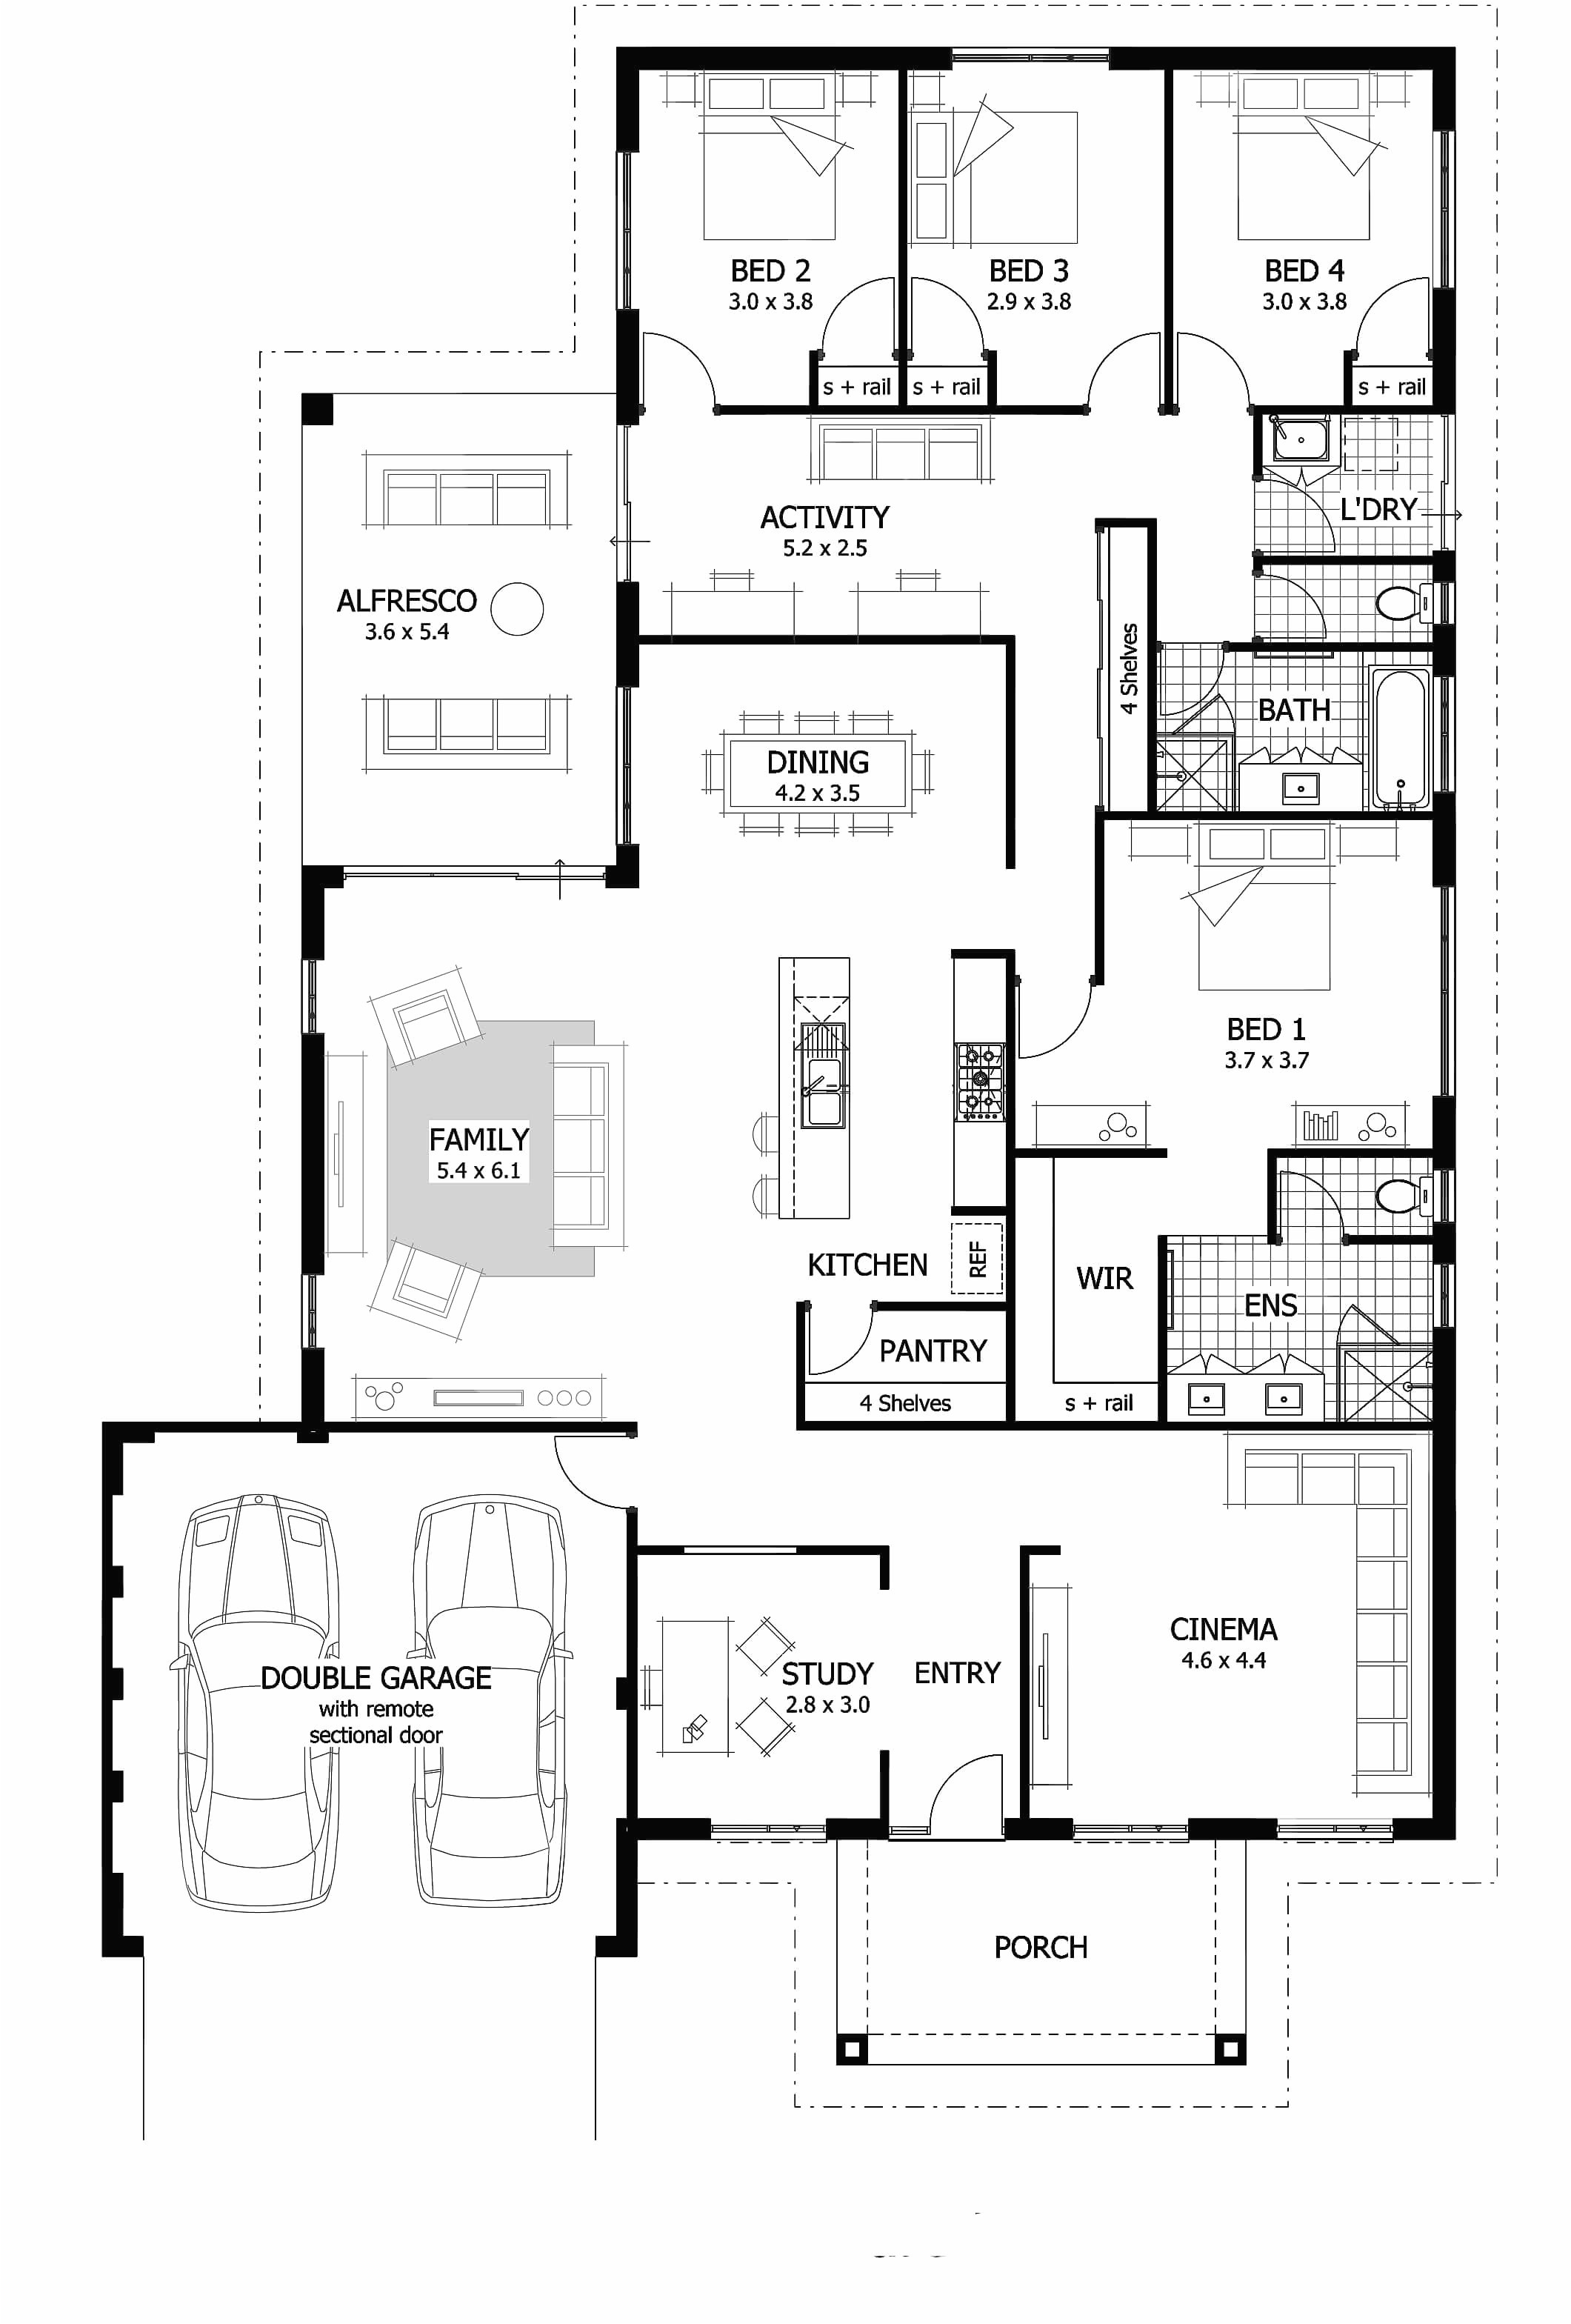 luxury homes plans the best cliff may floor plans luxury floor plan ranch house at home and